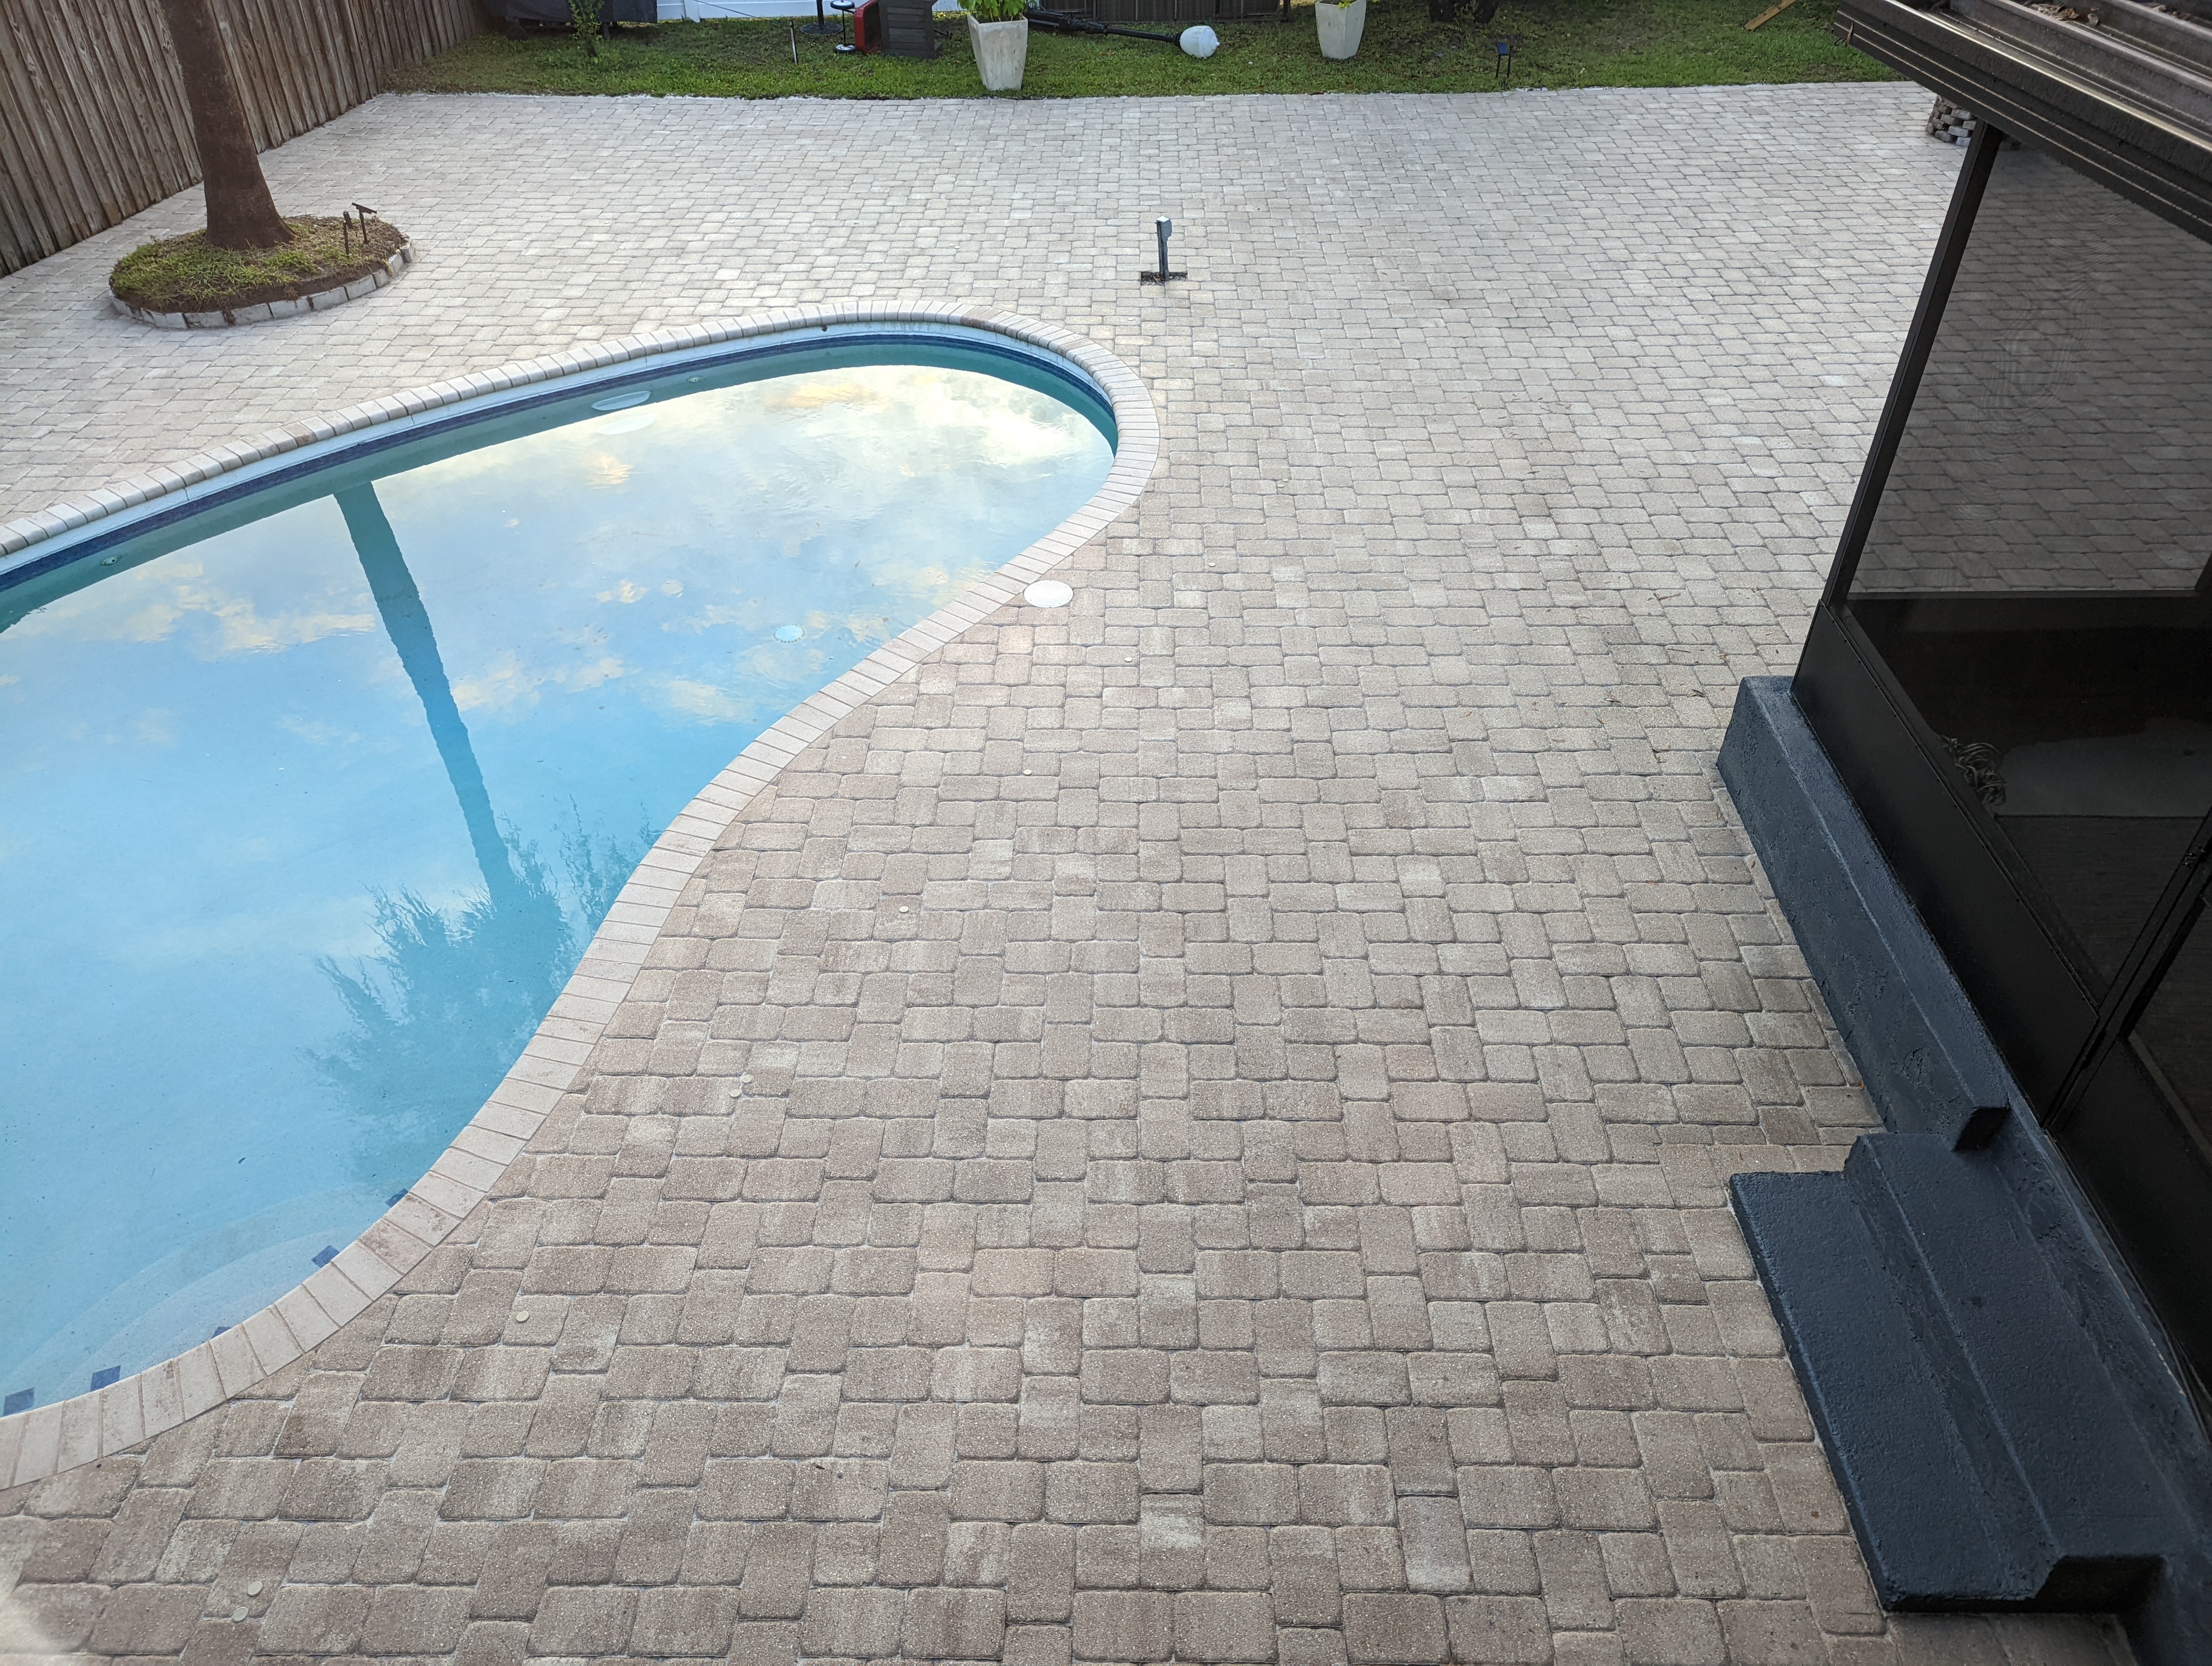 Paver pool deck with coping